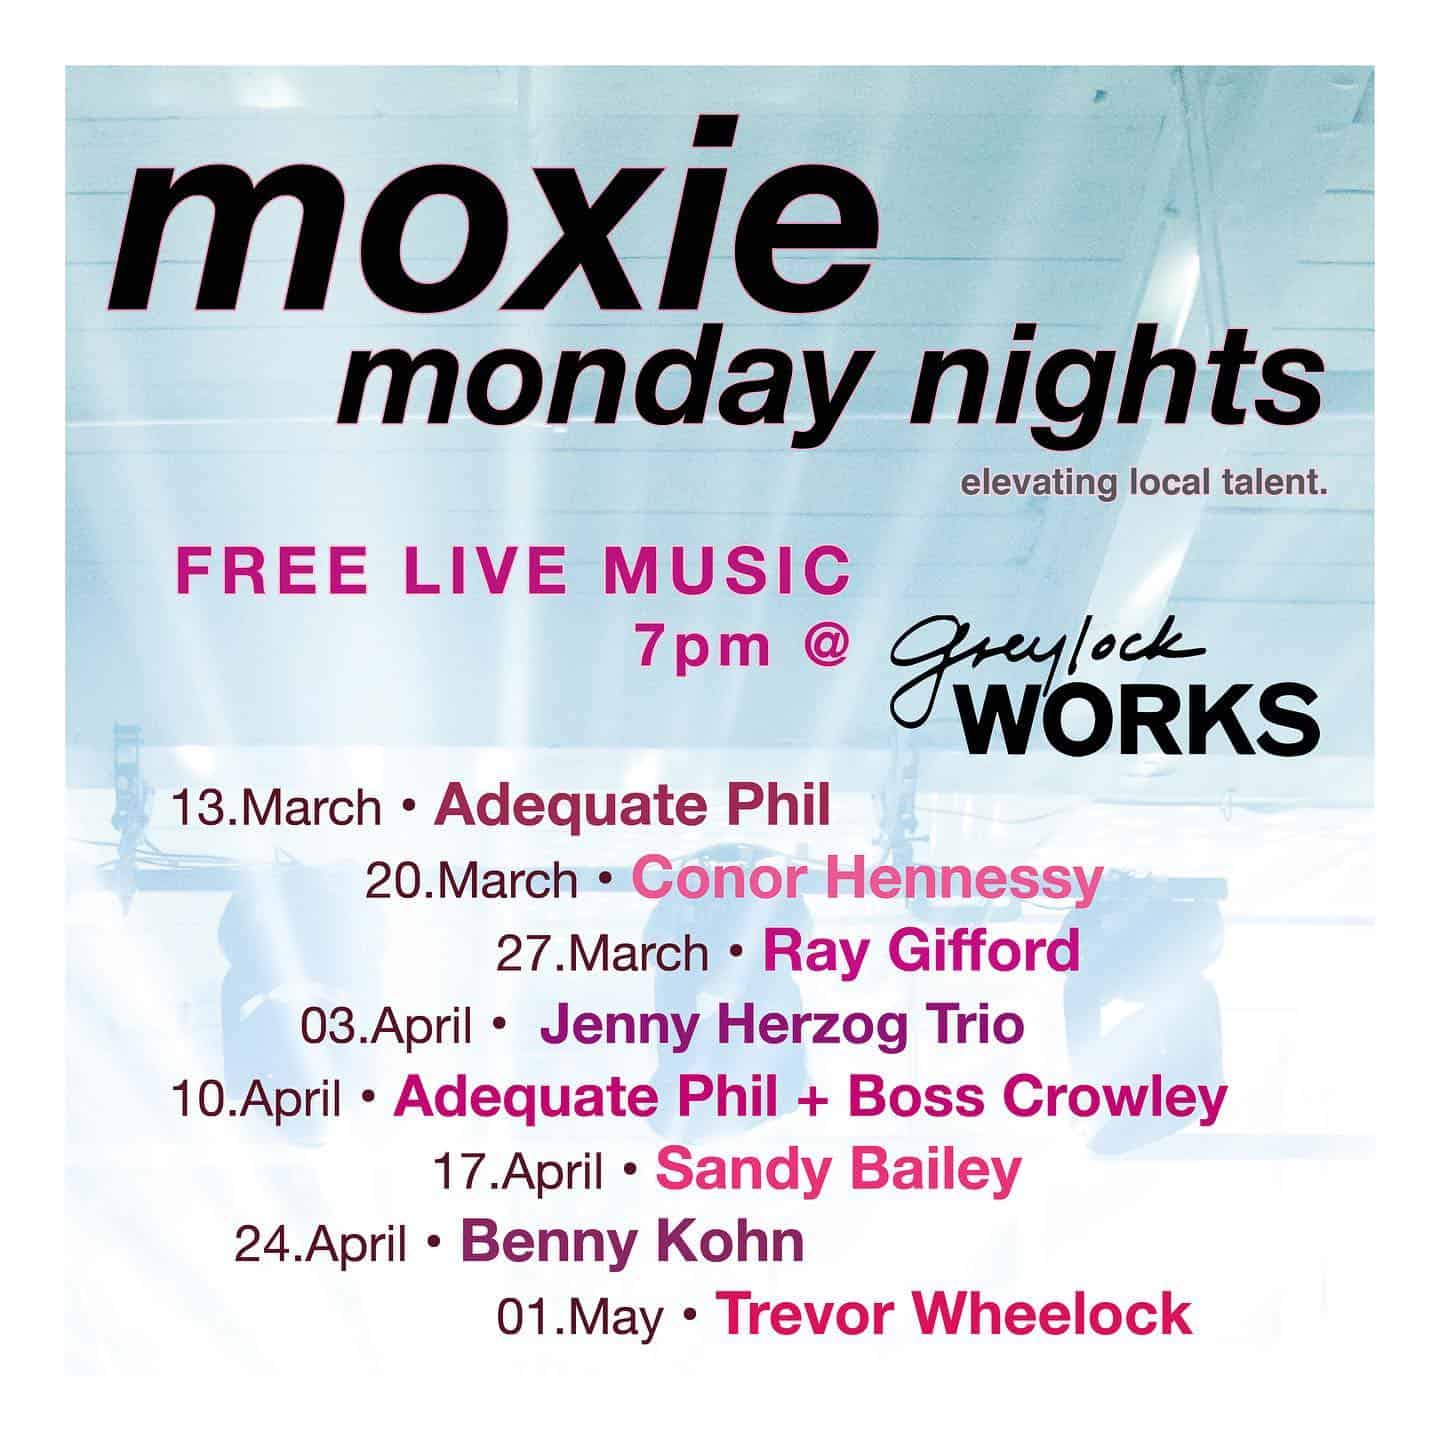 GreylockWorks is hosting free live local music on Monday nights, inviting everyone to come relax and celebrate local talent.